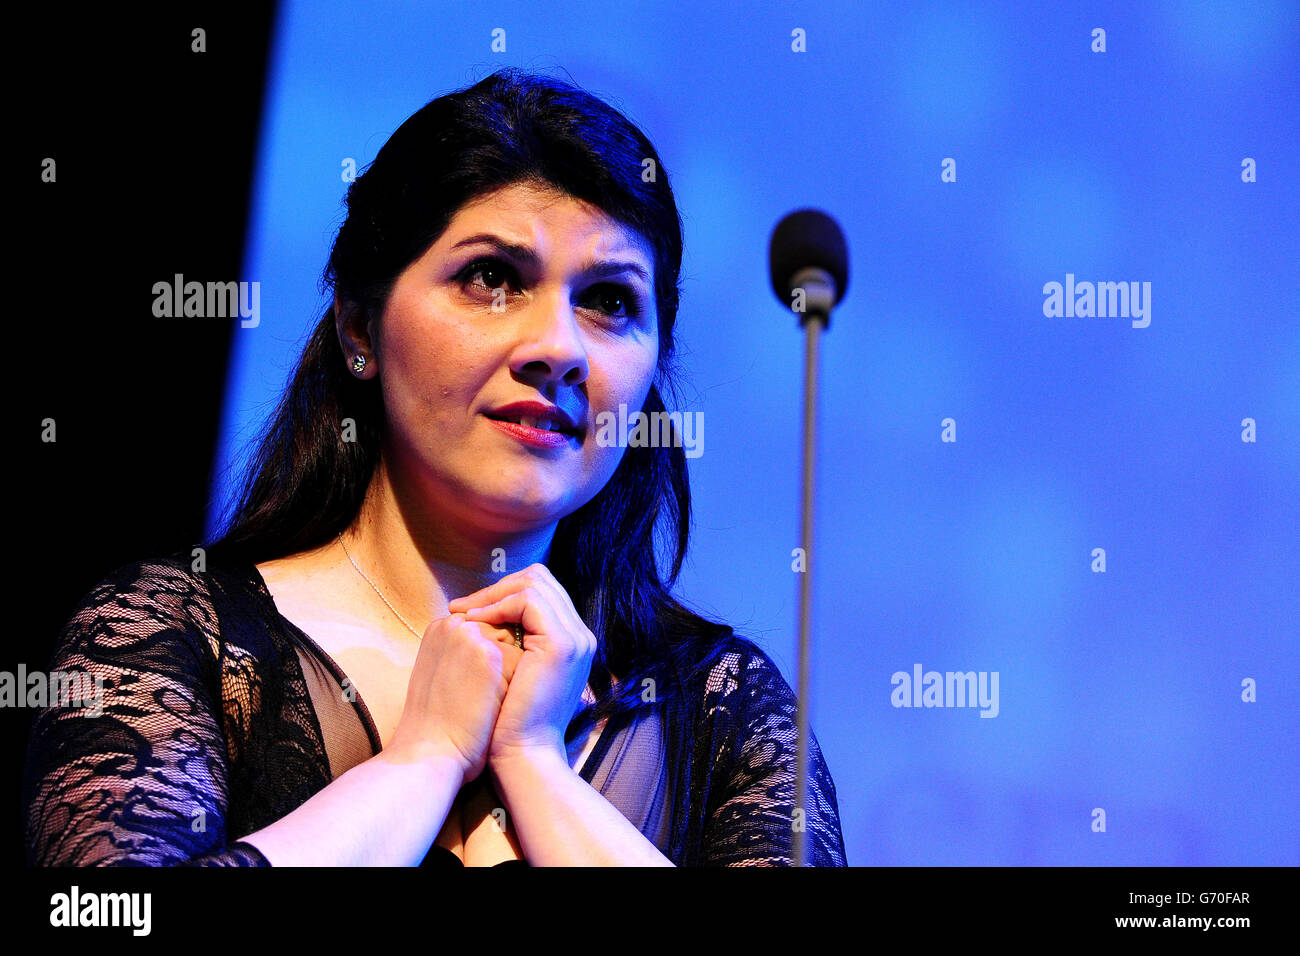 Susana Gaspar performs at the International Opera Awards 2014 held at the Grosvenor House Hotel, in London. Stock Photo